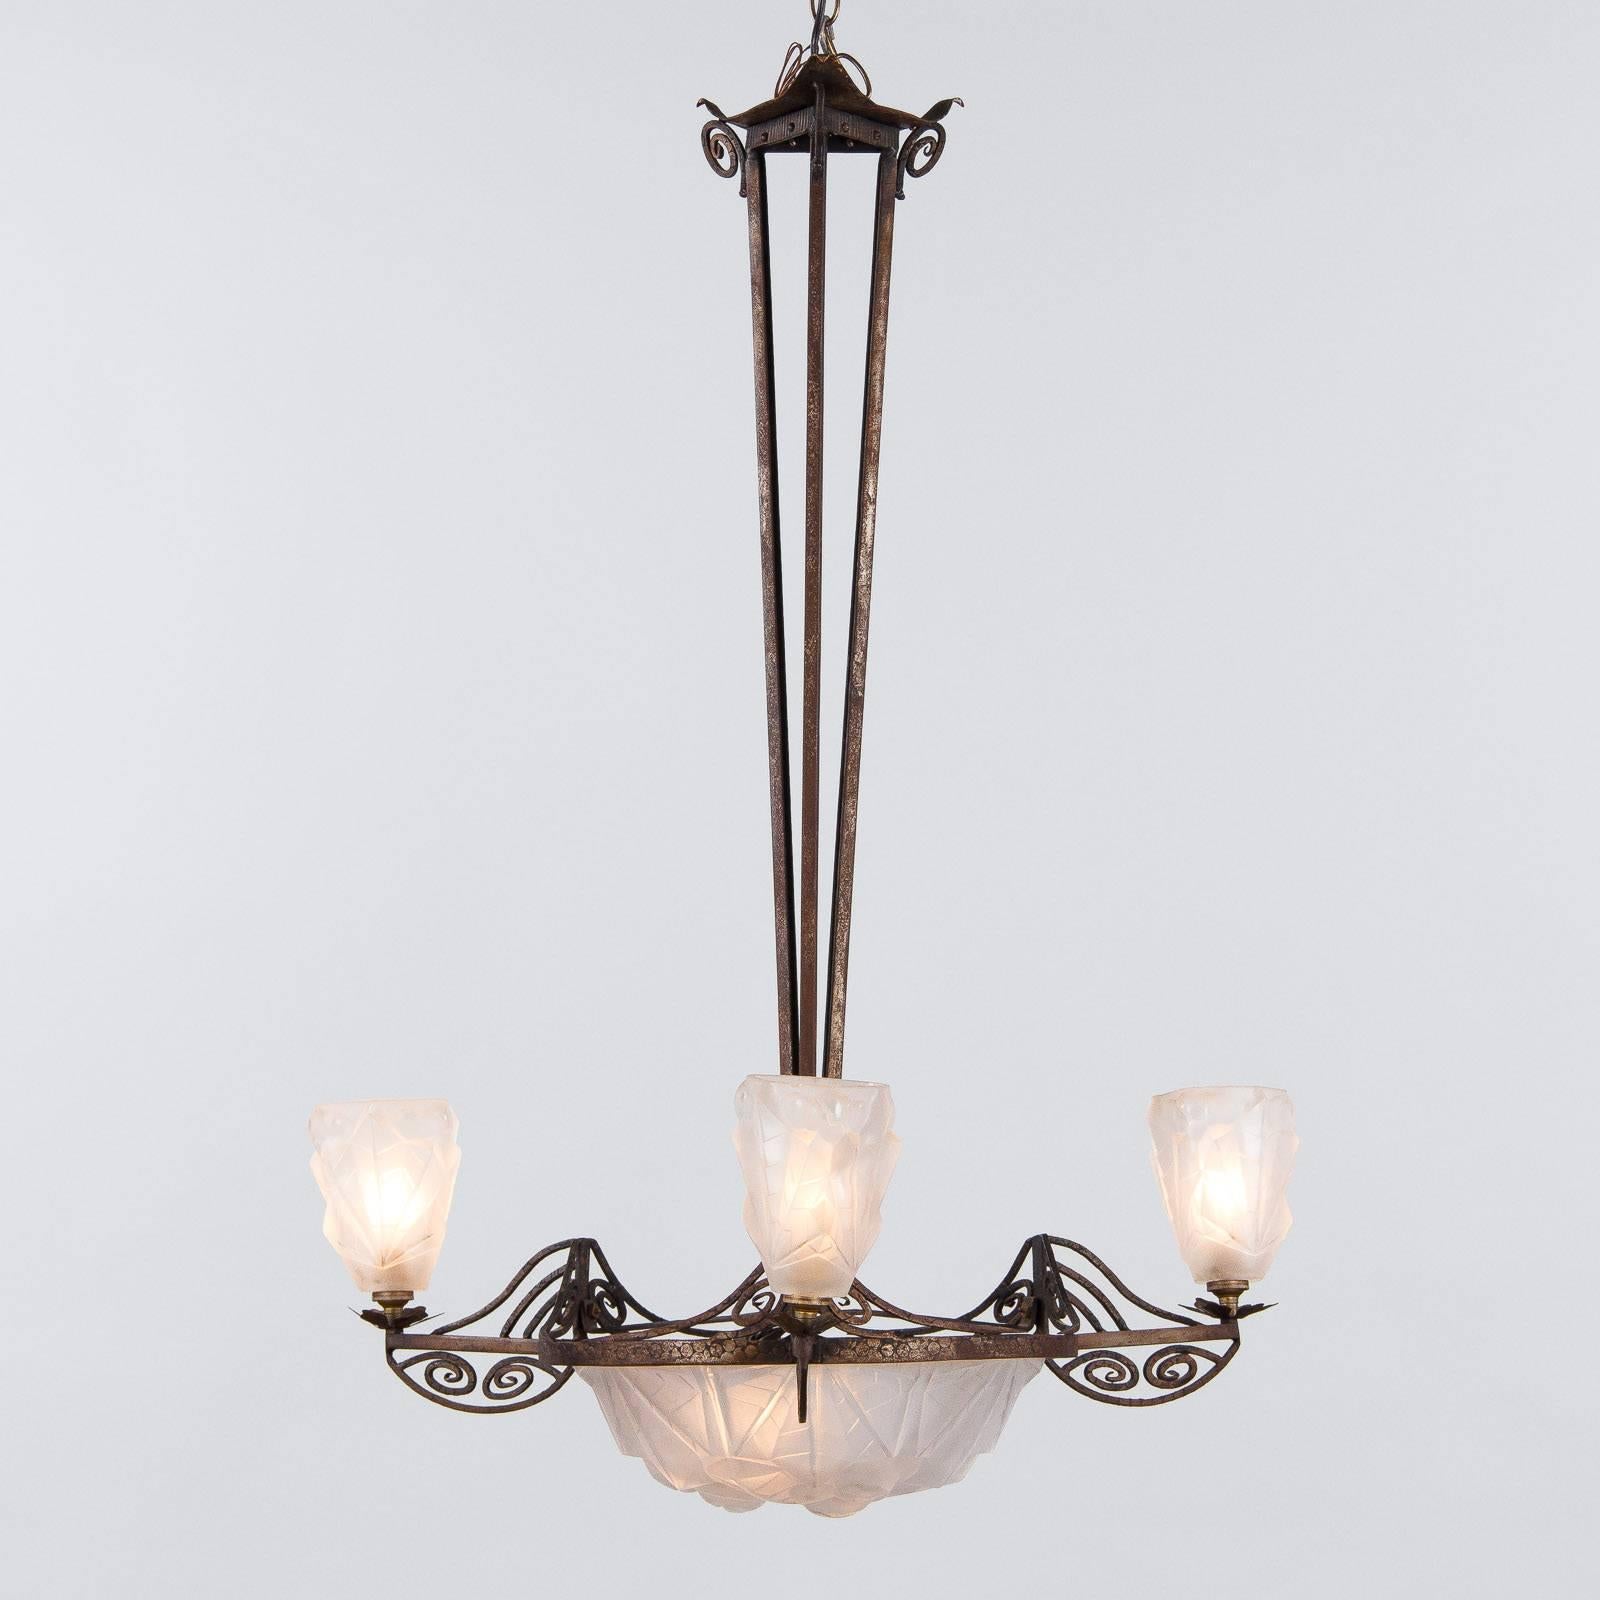 A striking French Art Deco chandelier in iron and frosted cut glass, signed by Degue, circa 1930. The centerpiece is a large bowl of frosted glass cut into numerous angles, with three stylized rosettes and their leaves being framed by more subtle